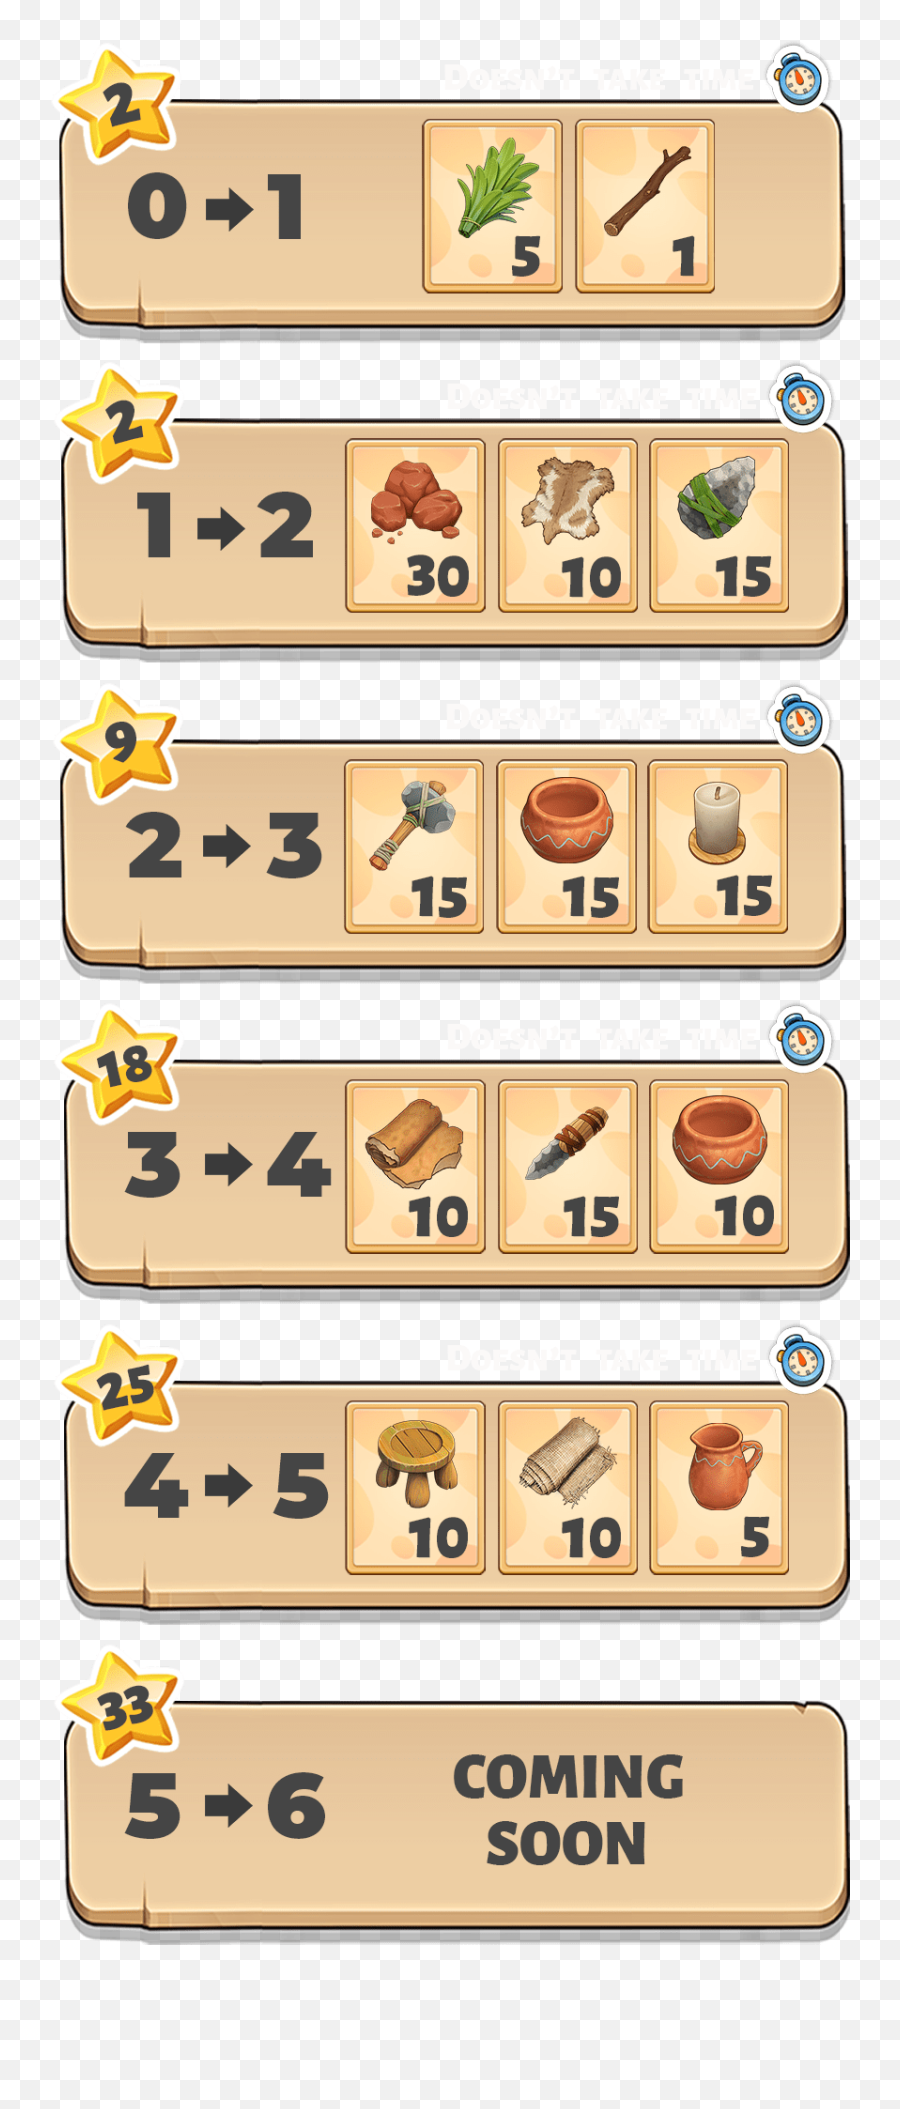 Crafting Recipes In Family Island Game Png Neko Atsume App Icon